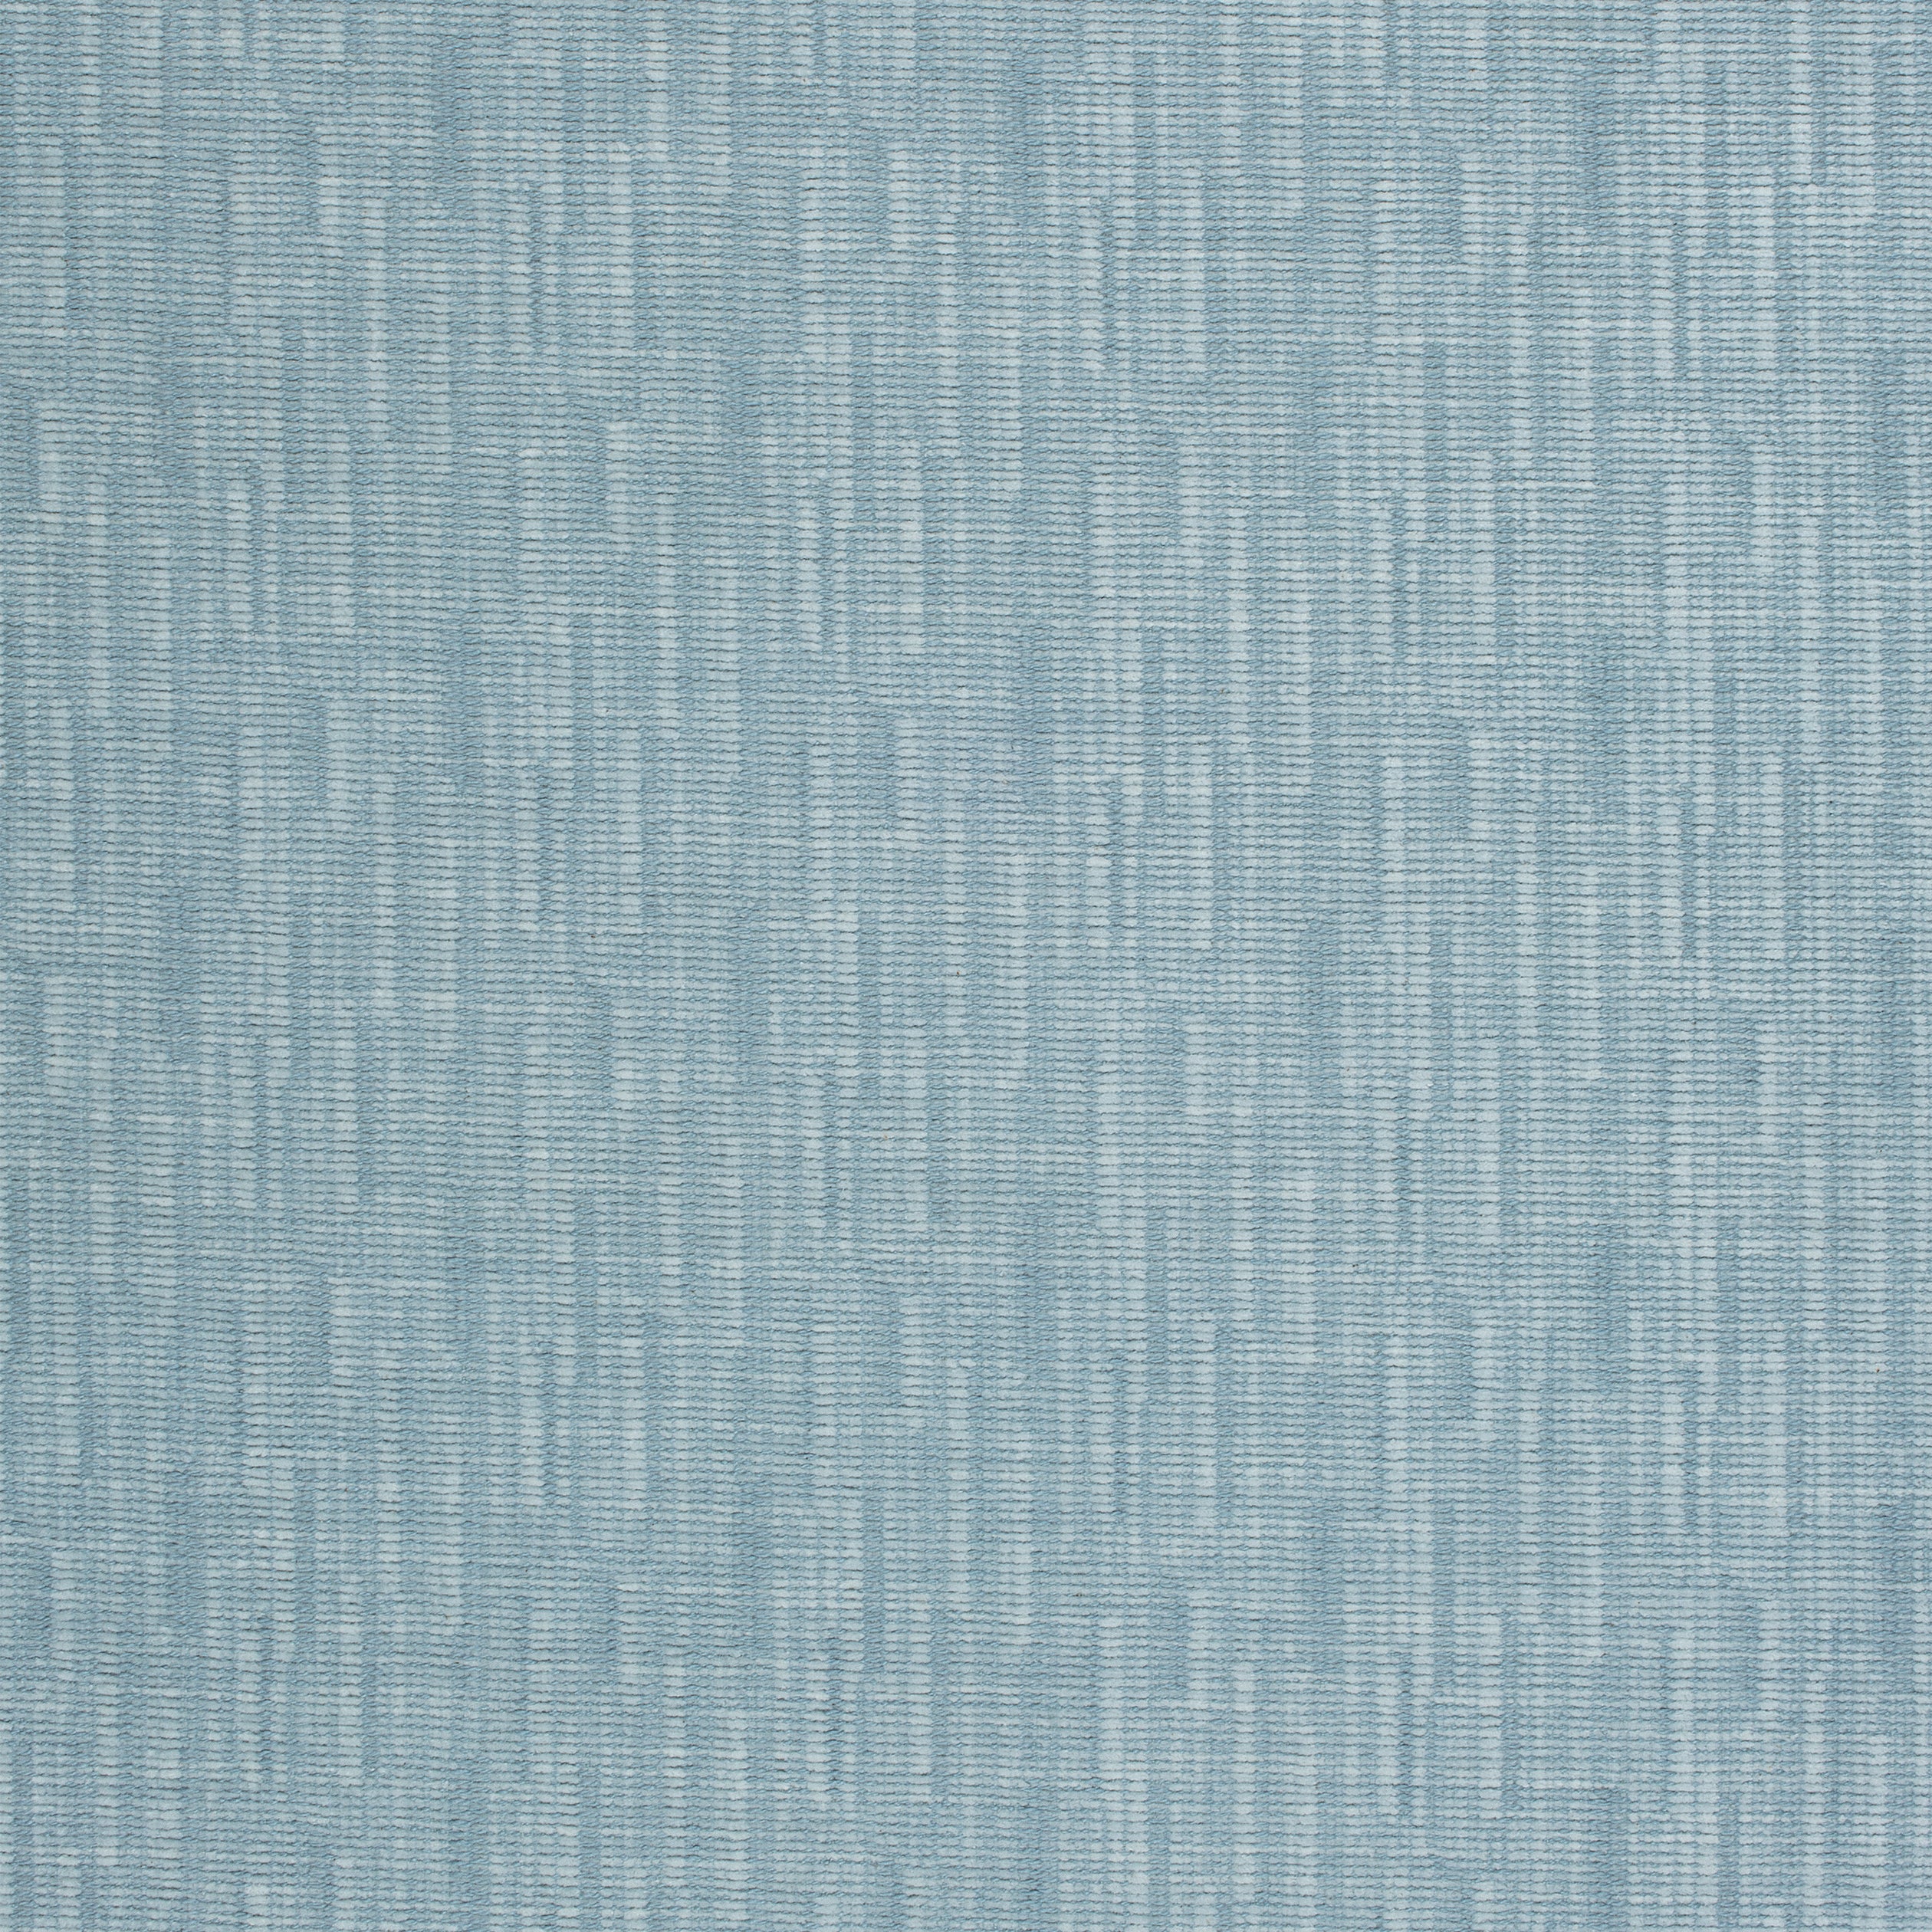 Dominic fabric in sky color - pattern number W789121 - by Thibaut in the Reverie collection